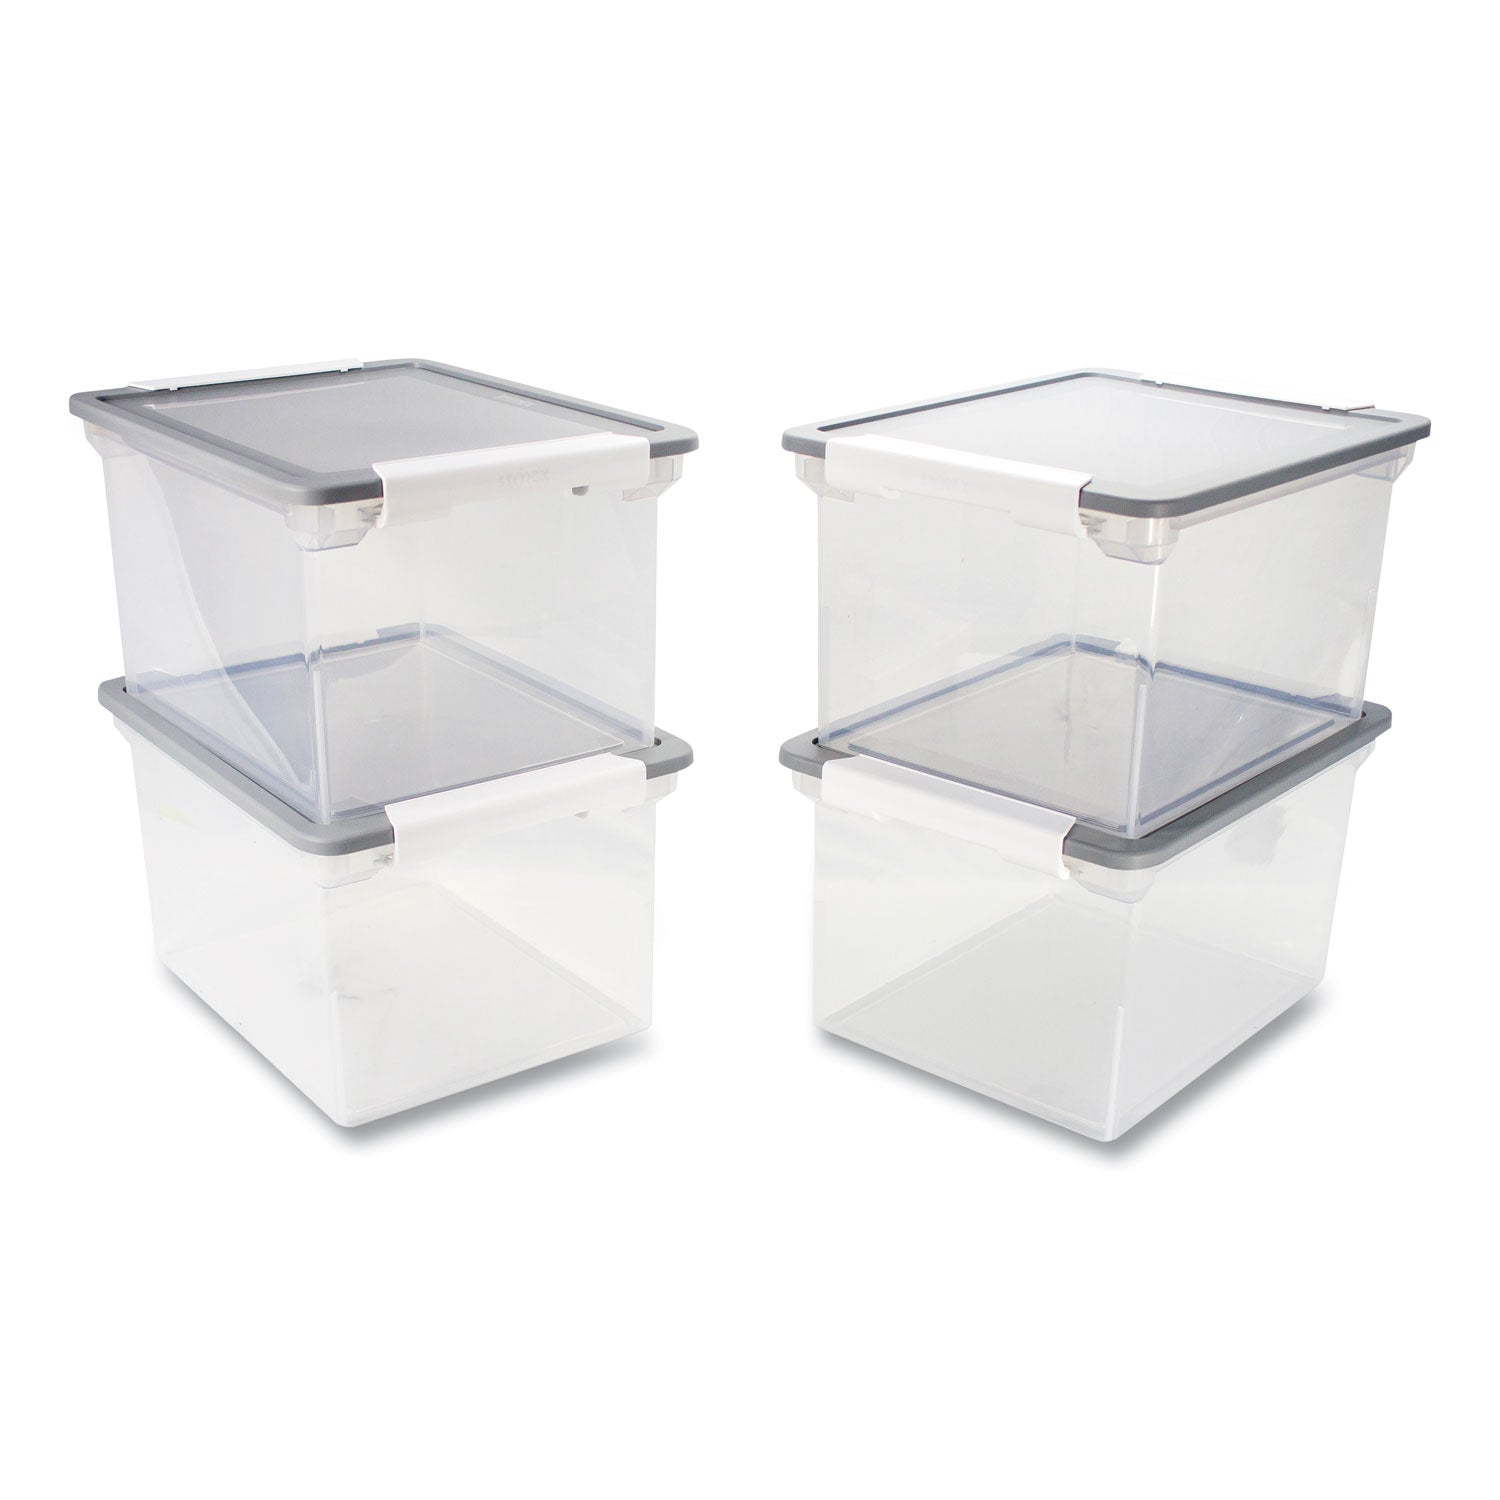 tote-with-locking-handles-legal-letter-139-x-183-x-106-clear-silver-4-carton_stx61530u04c - 4